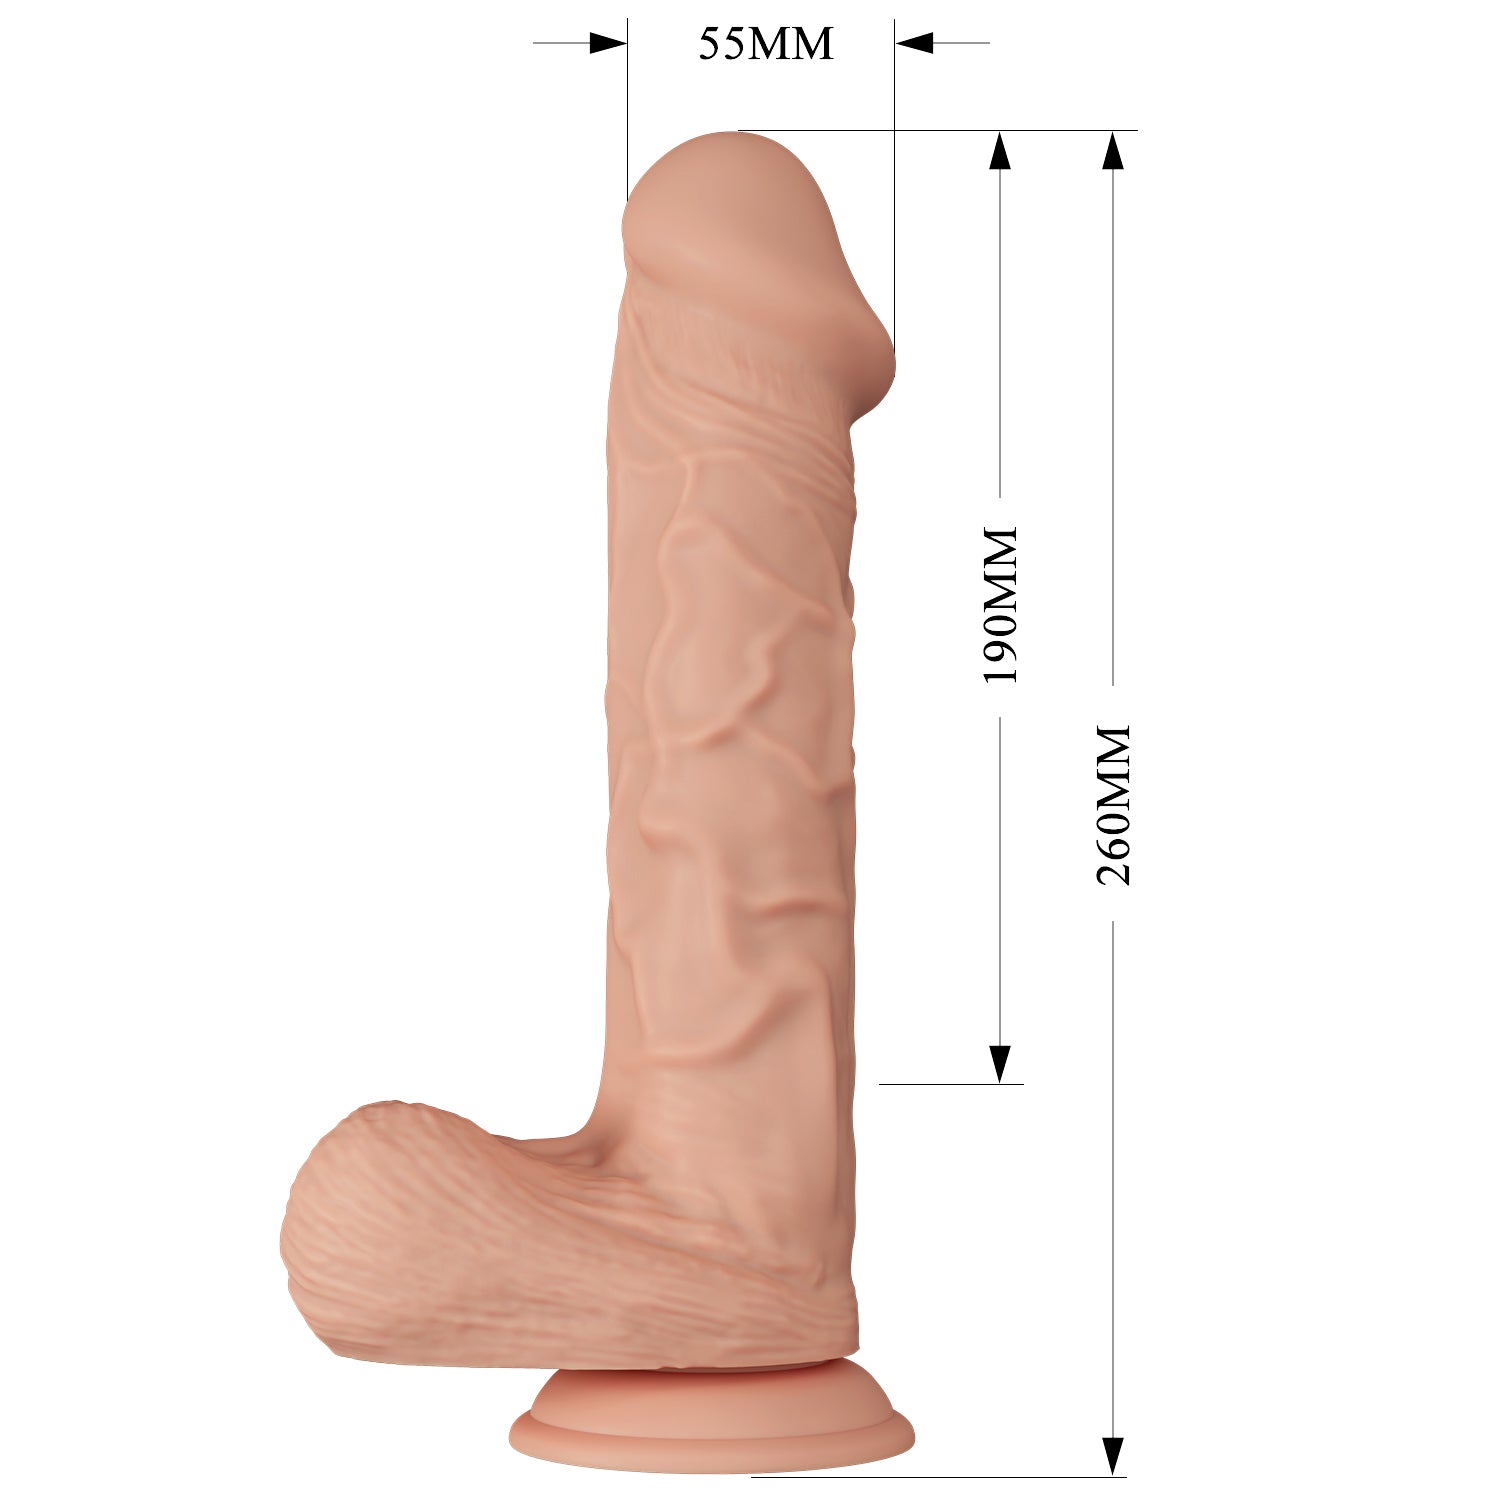 Baile 10.2 Inch Lifelike Vibrating Dildo with Suction Cup in Flesh